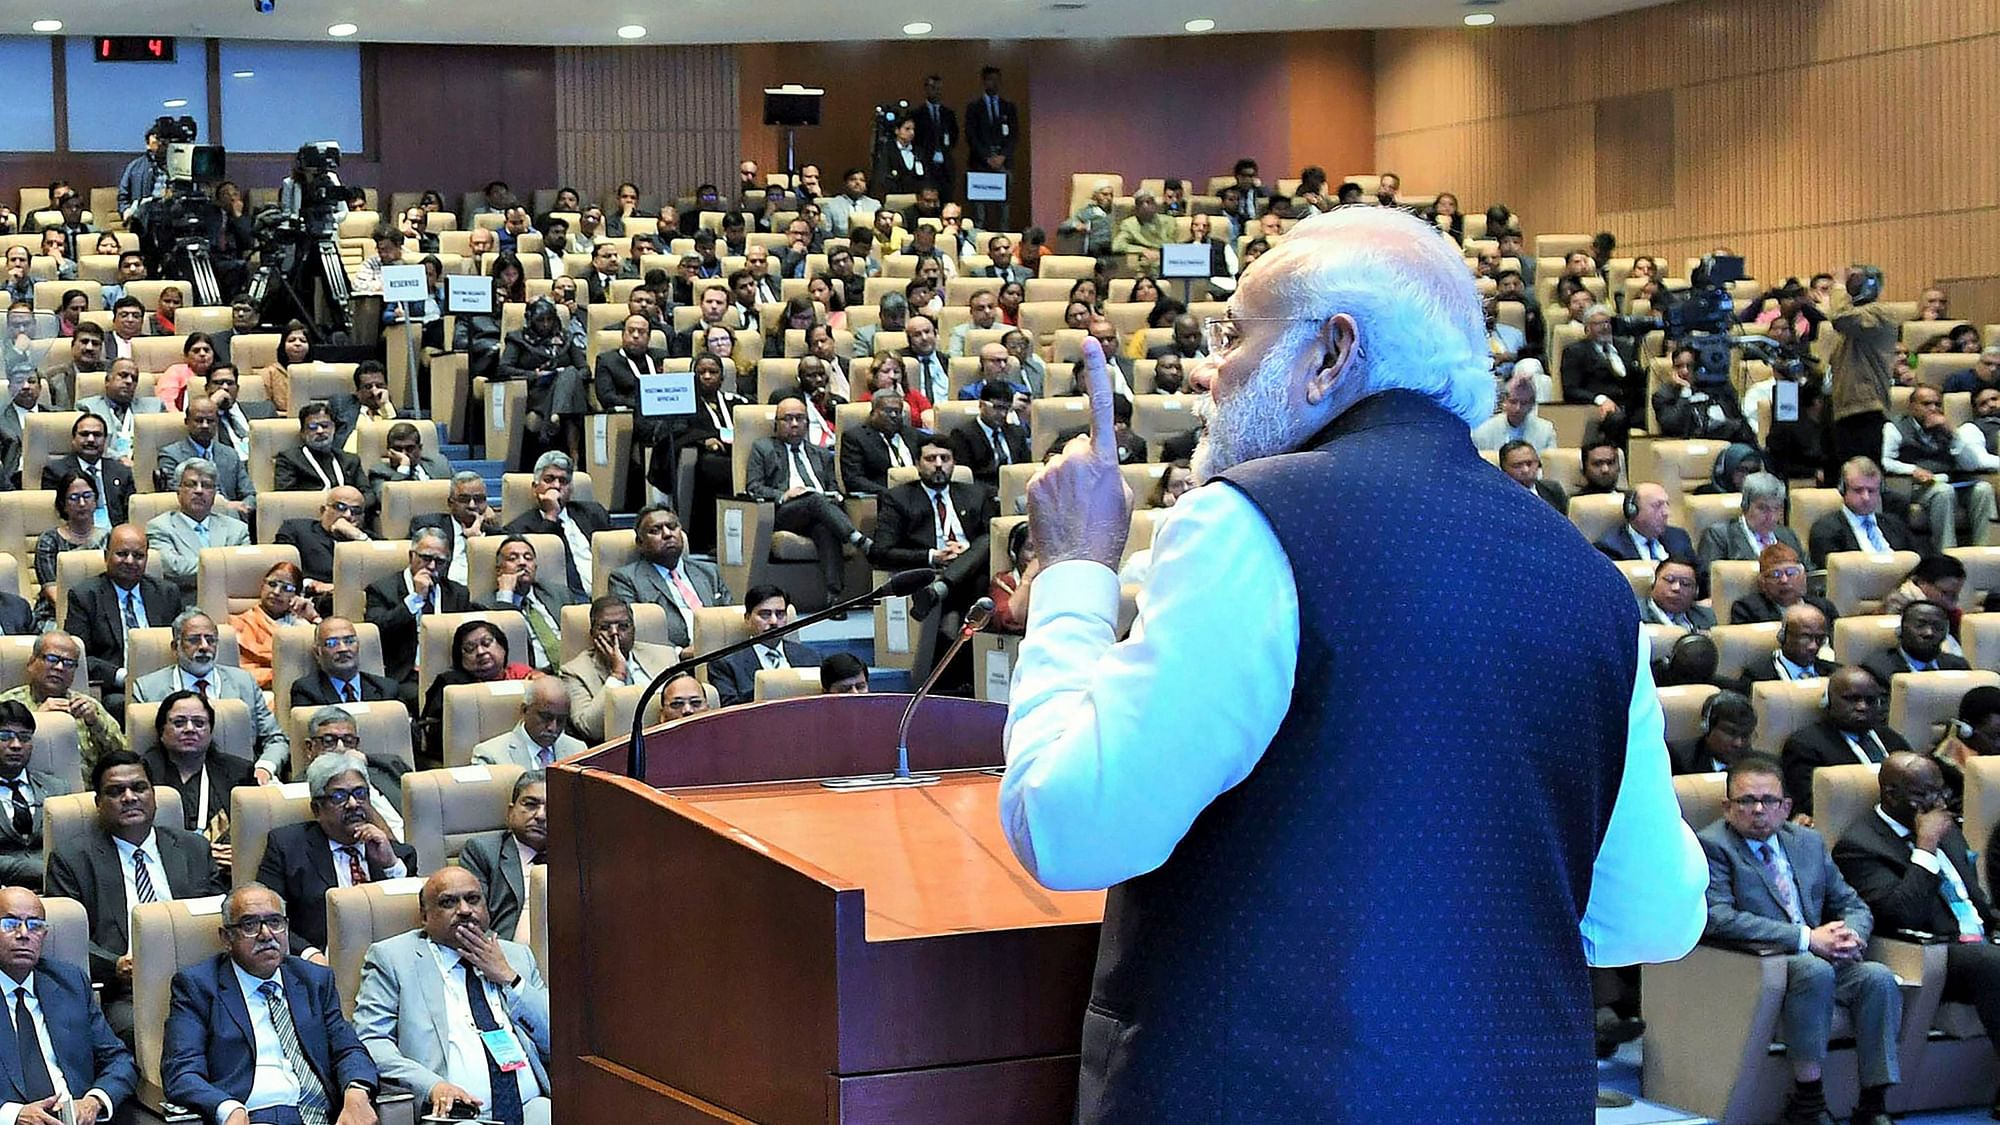 'Have repealed 1500 obsolete laws', PM Modi at Judicial Conference in the capital.